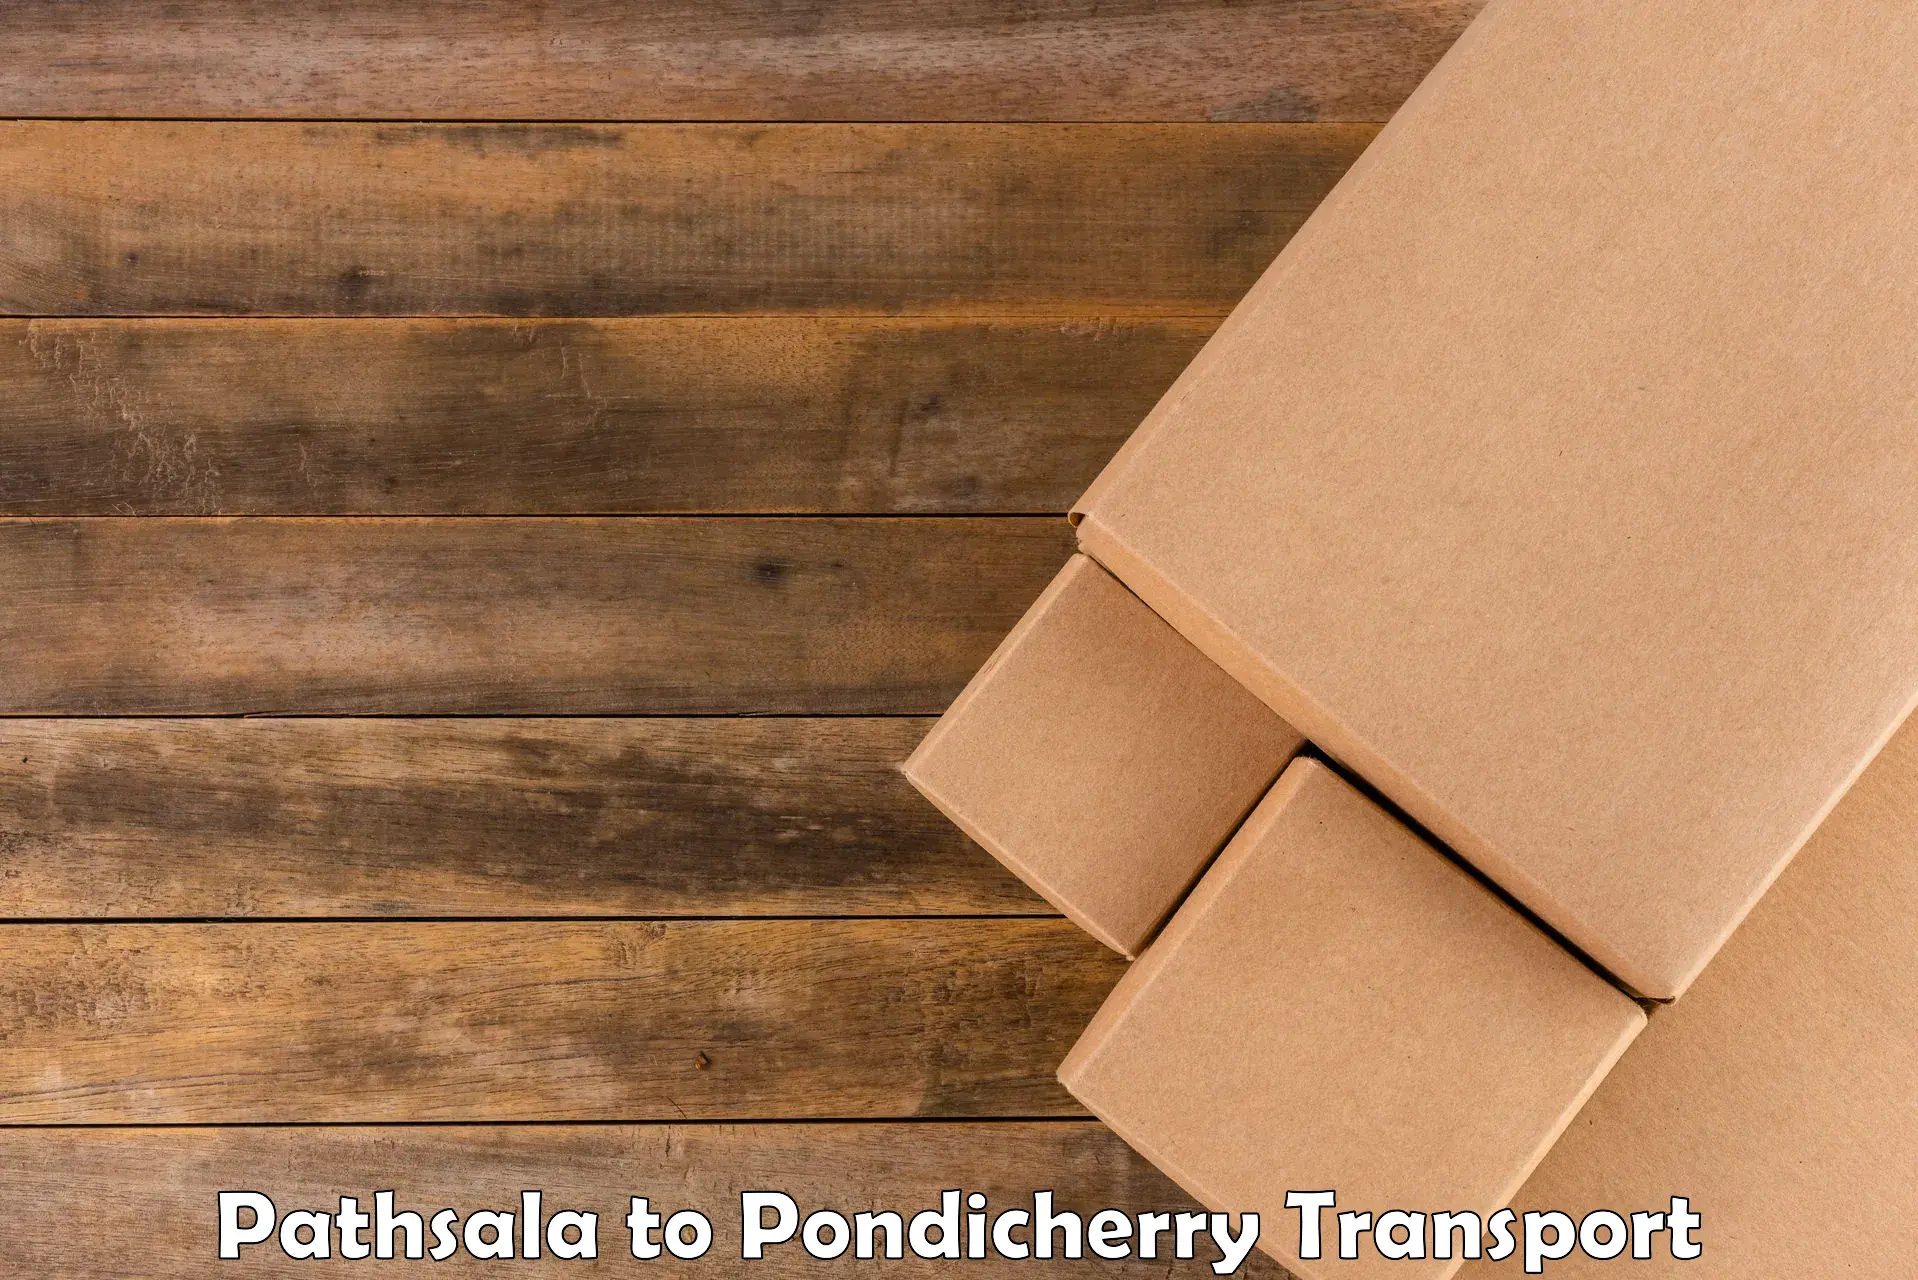 Daily parcel service transport in Pathsala to Pondicherry